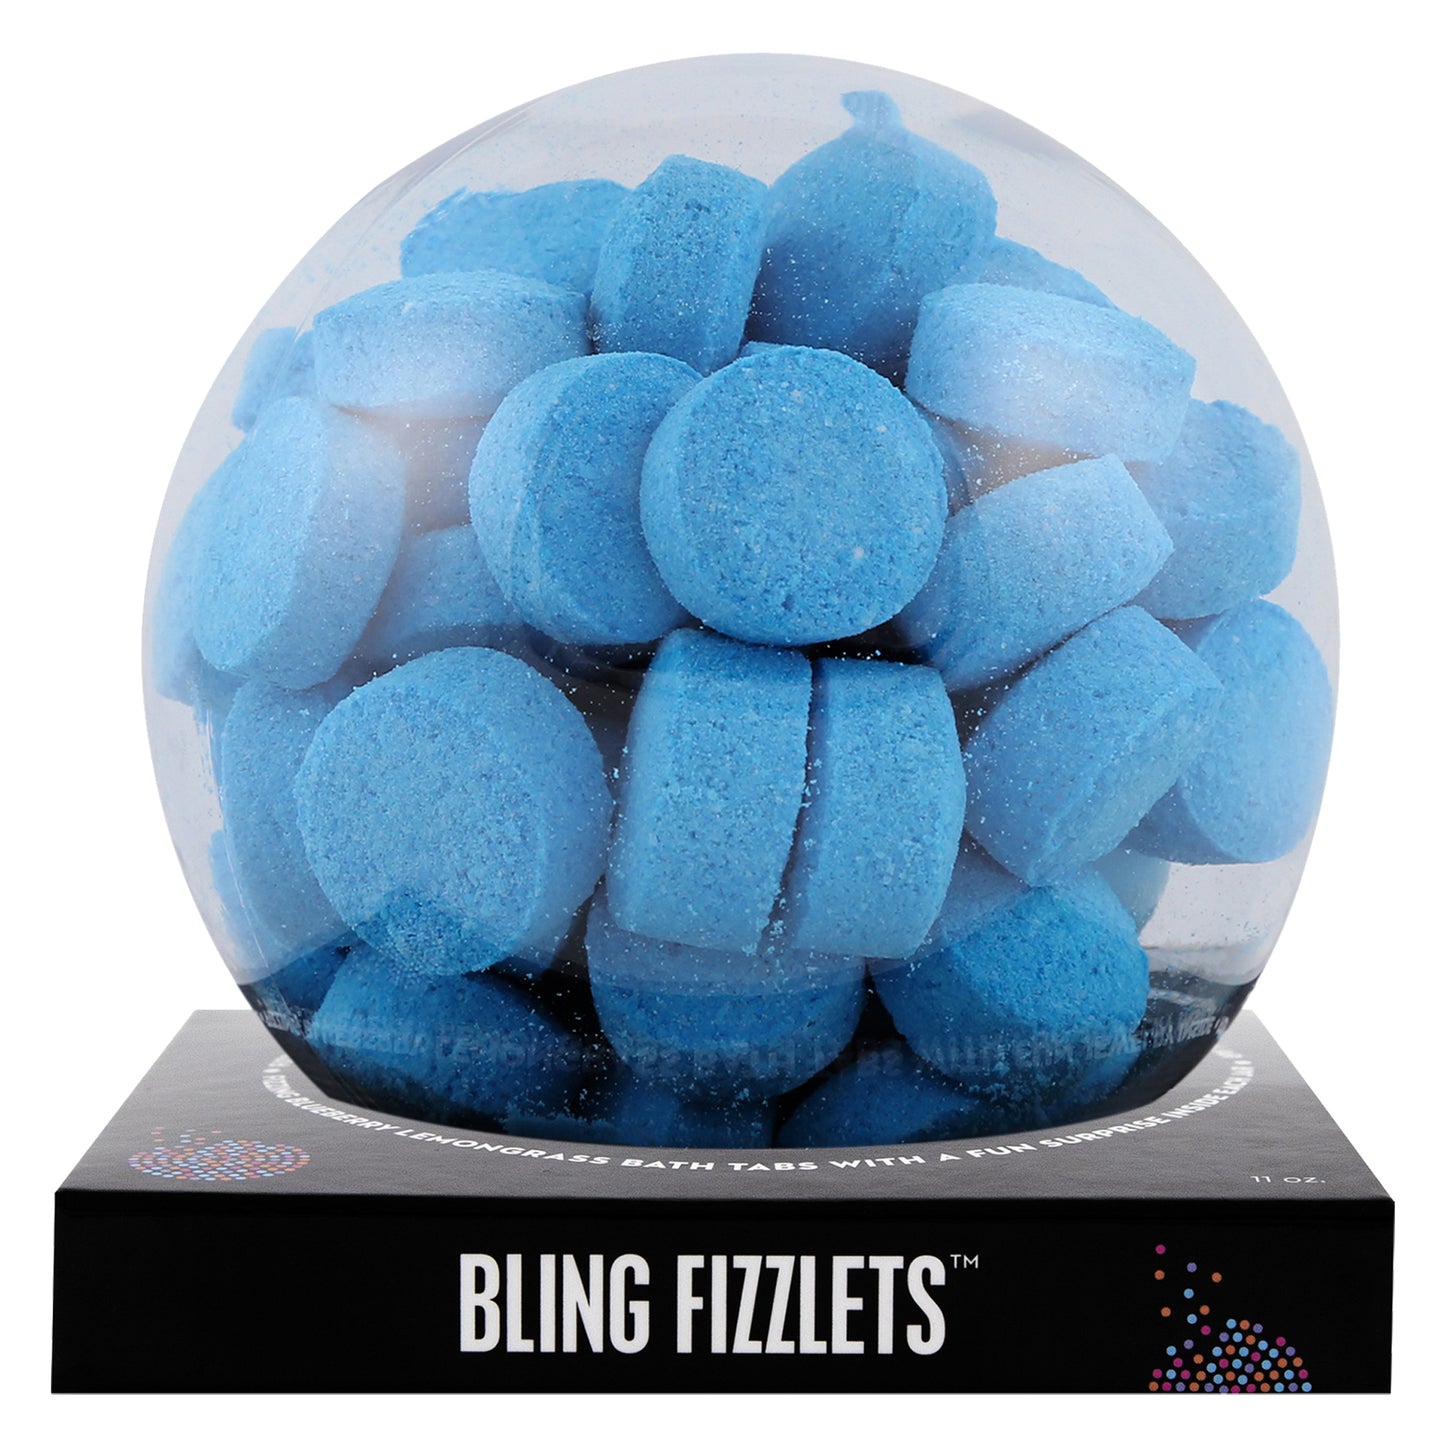 Blue Bling Fizzlets with a surprise inside, scented as blueberry lemongrass.